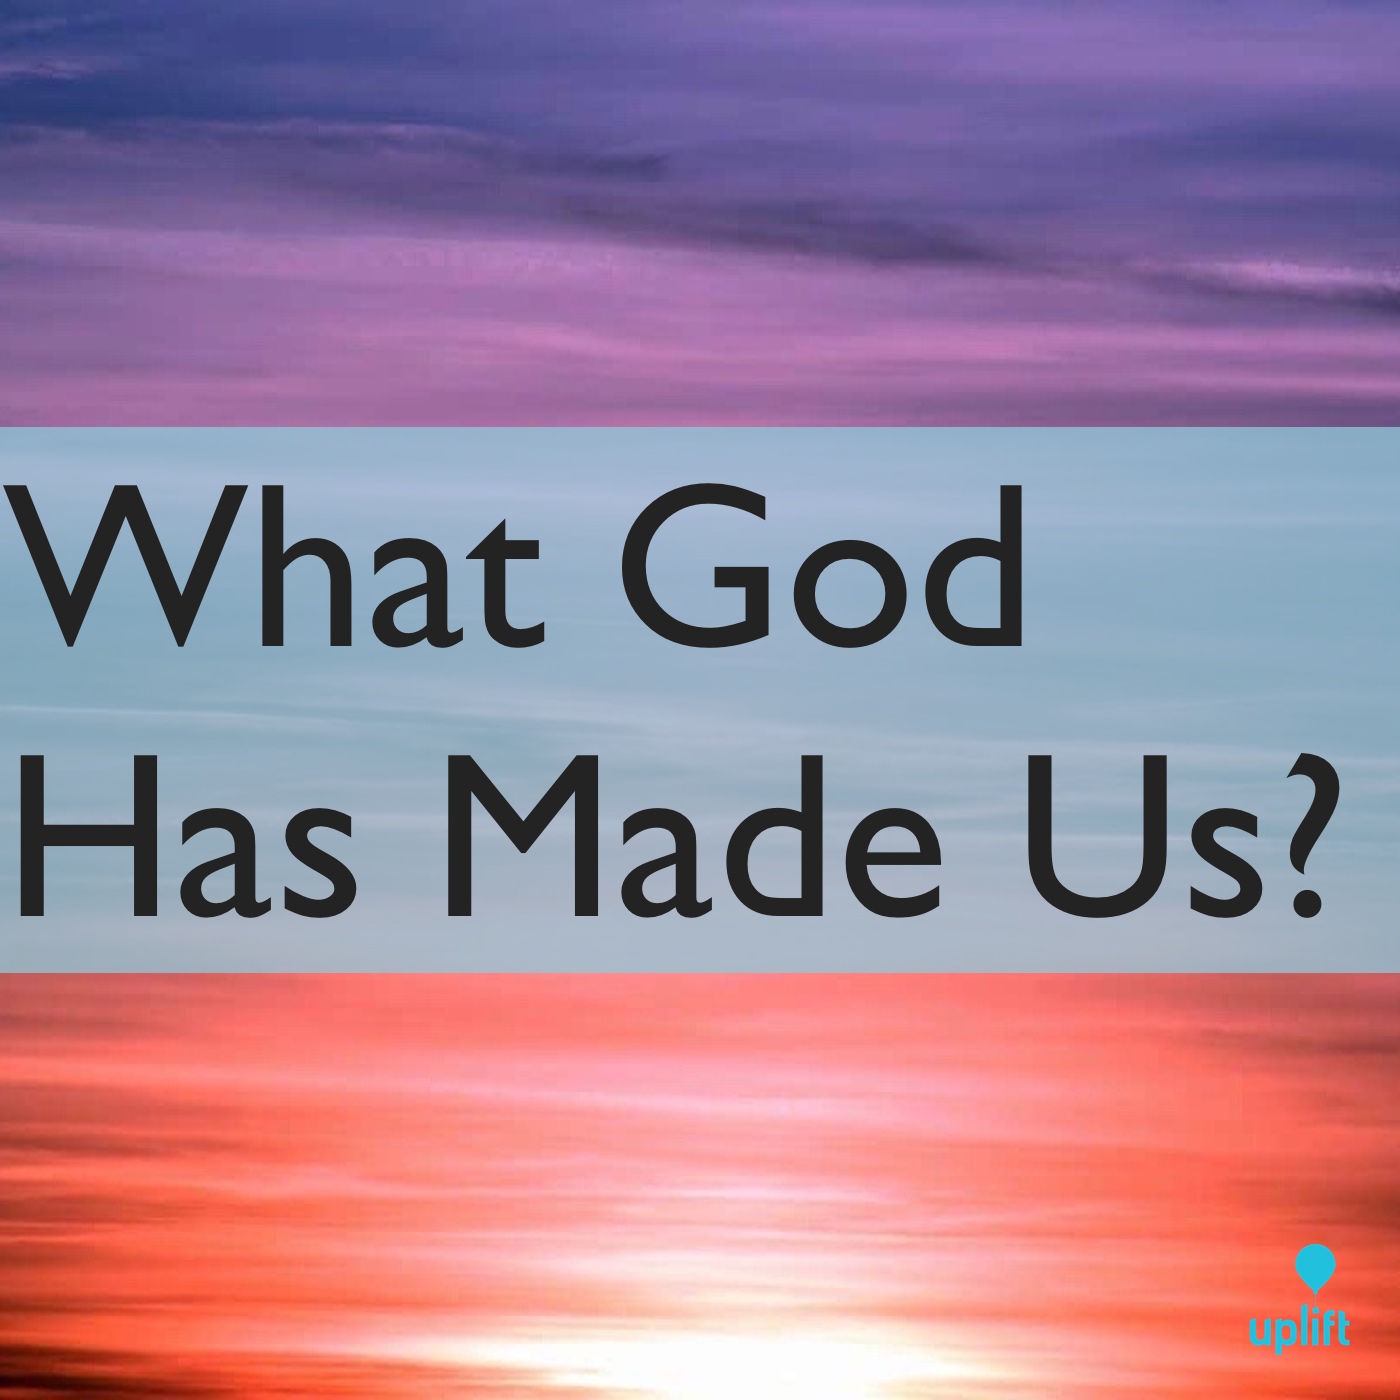 Episode 46: What God Has Made Us?